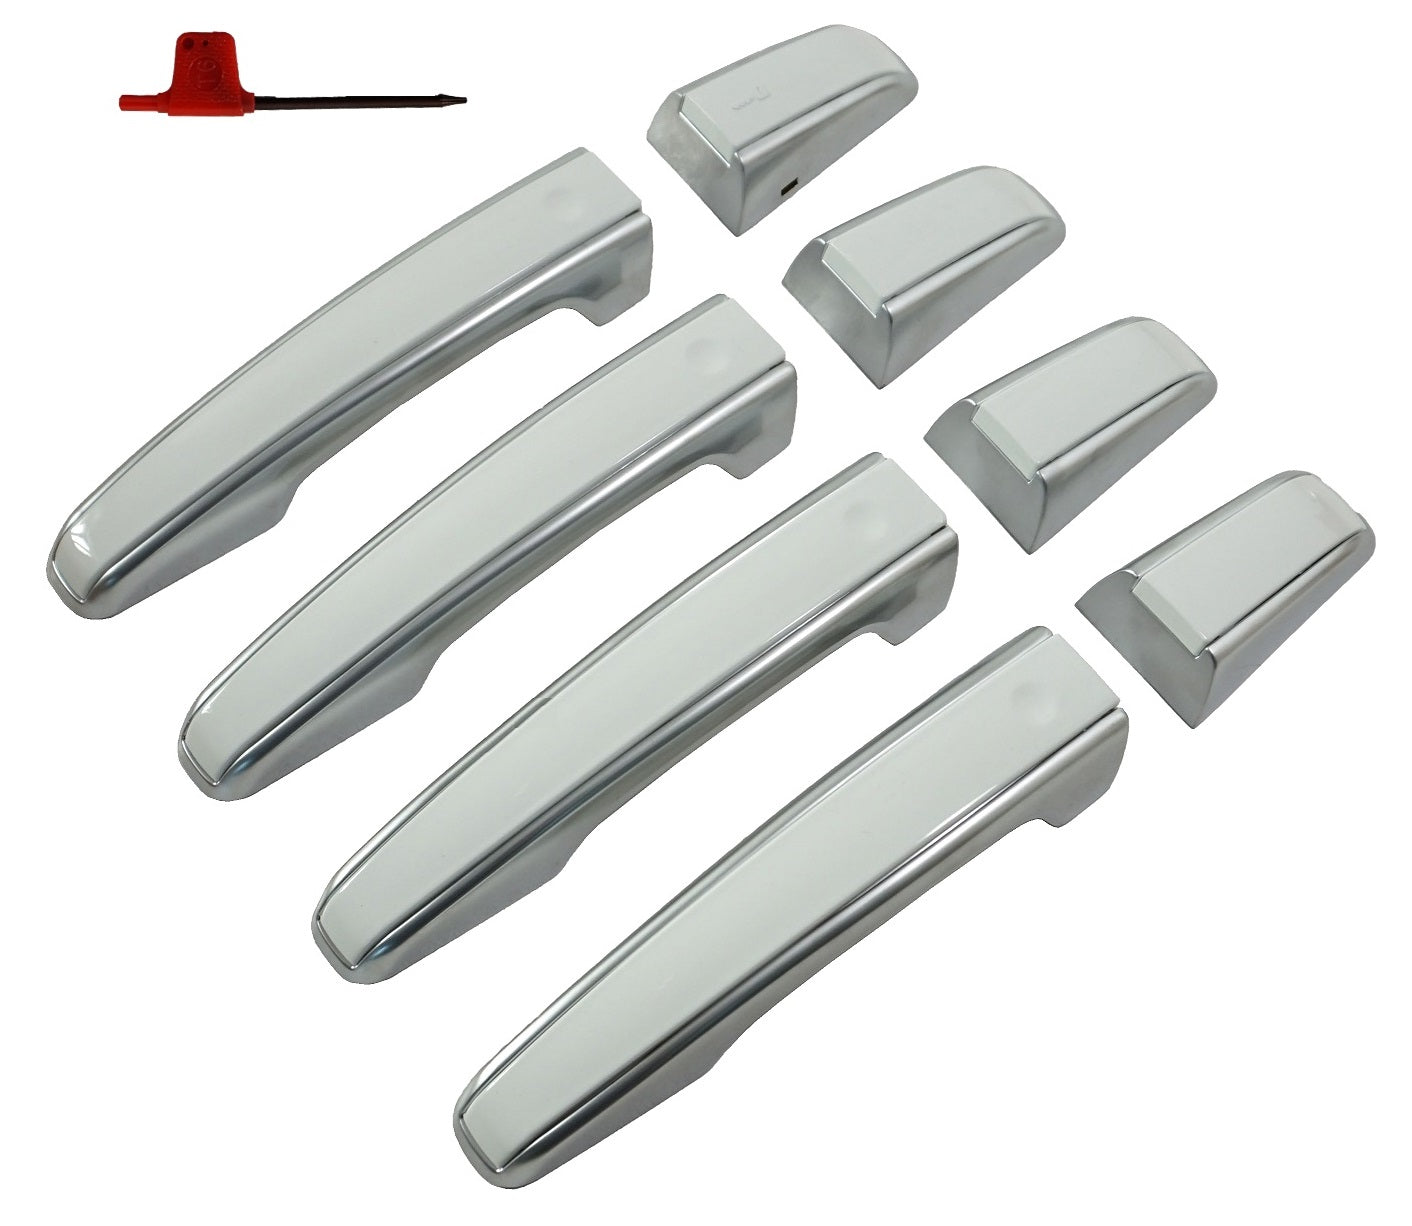 'Autobiography Style' Door Handles Skins in Silver & White for Land Rover Discovery 5